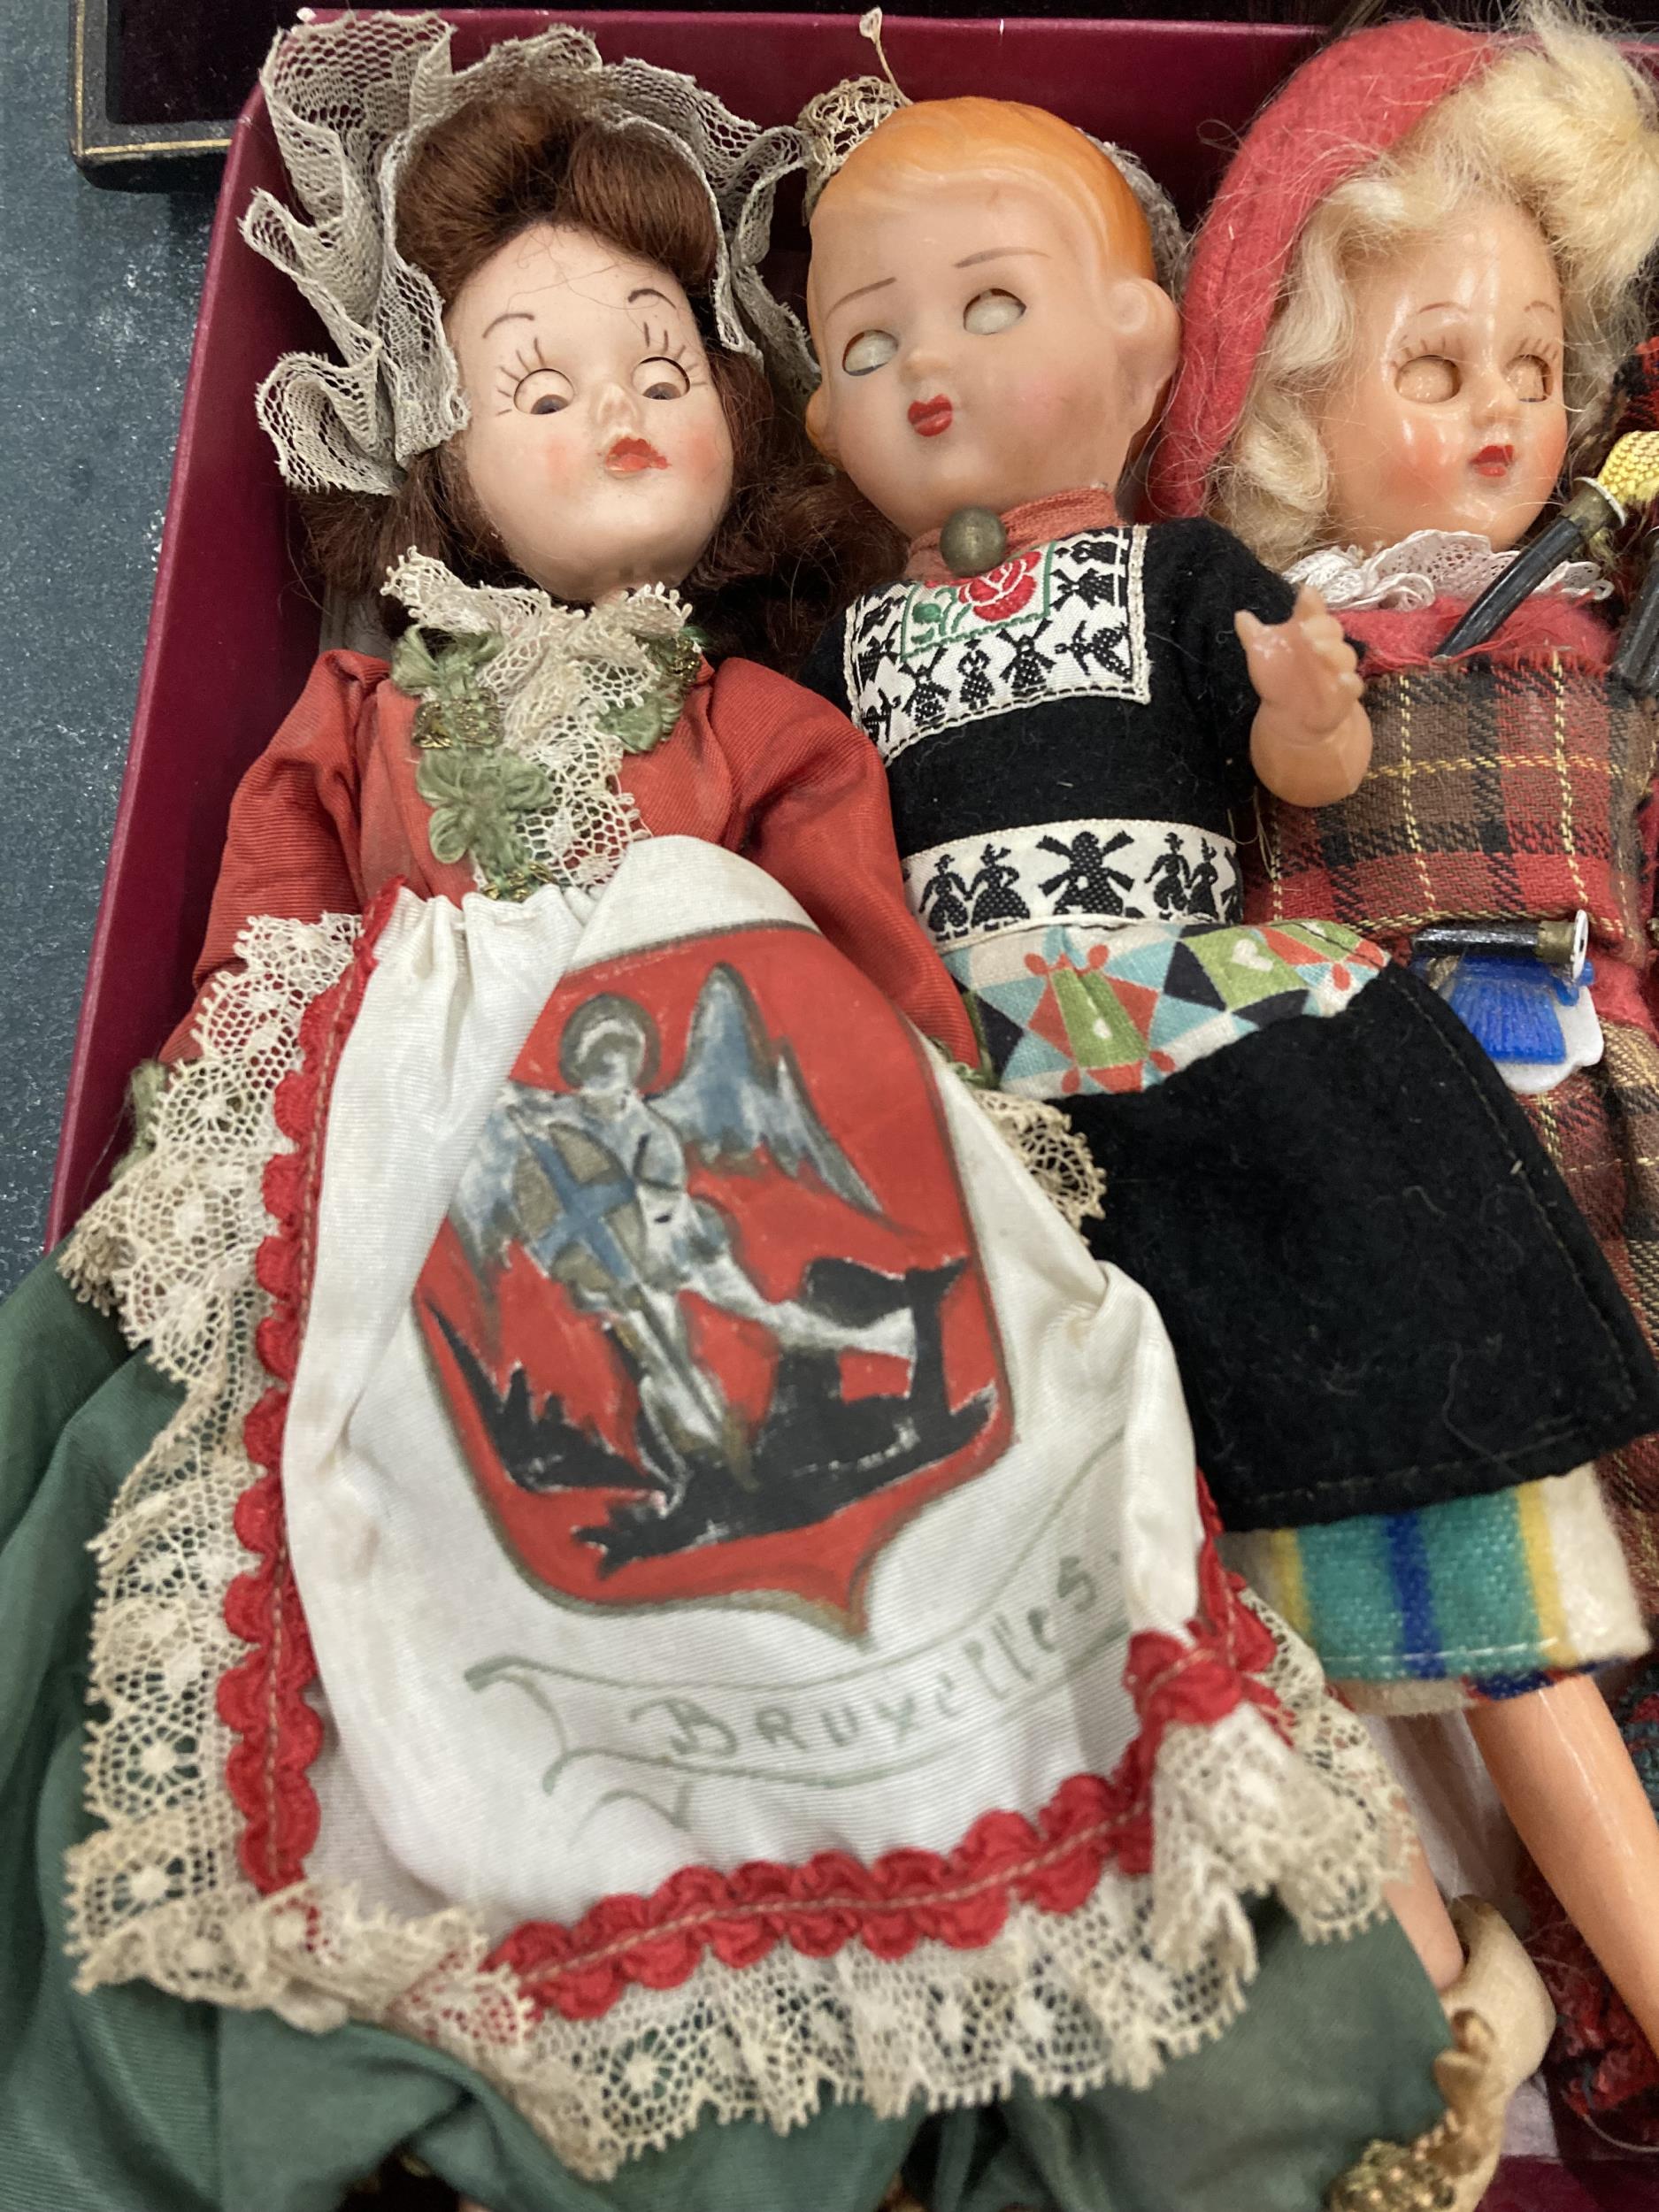 A COLLECTION OF VINTAGE DOLLS - Image 3 of 3